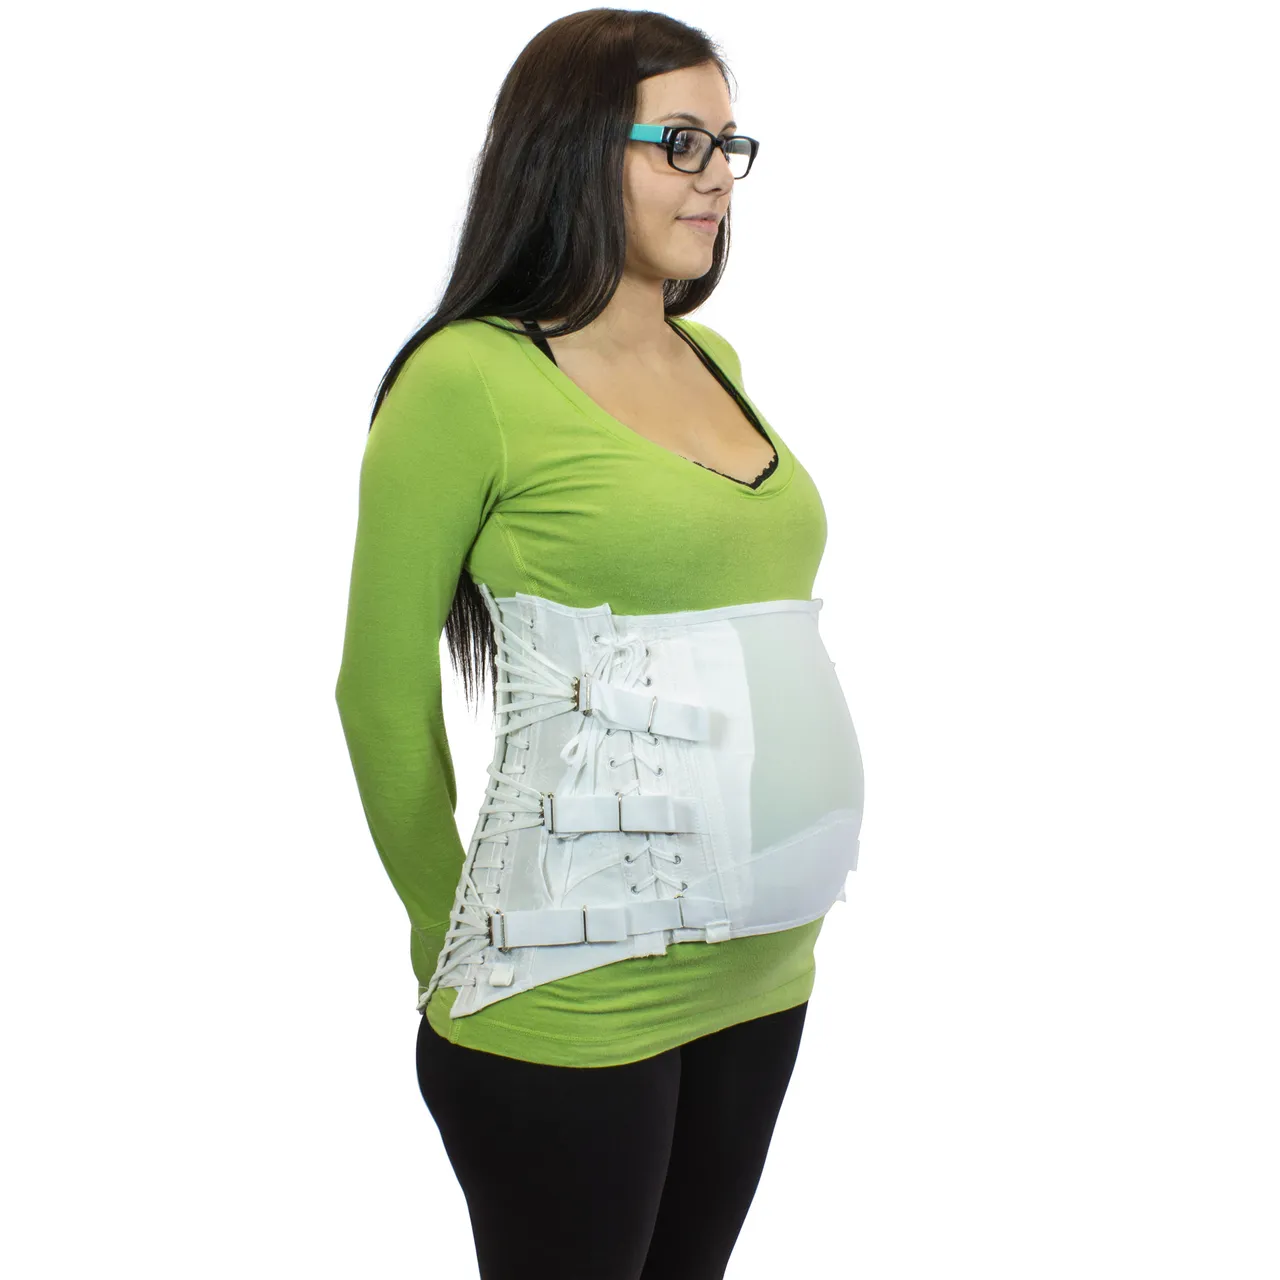 Freeman Manufacturing From: 529-32 To: 529-50 - Women's Maternity Lumbosacral Female Maternity